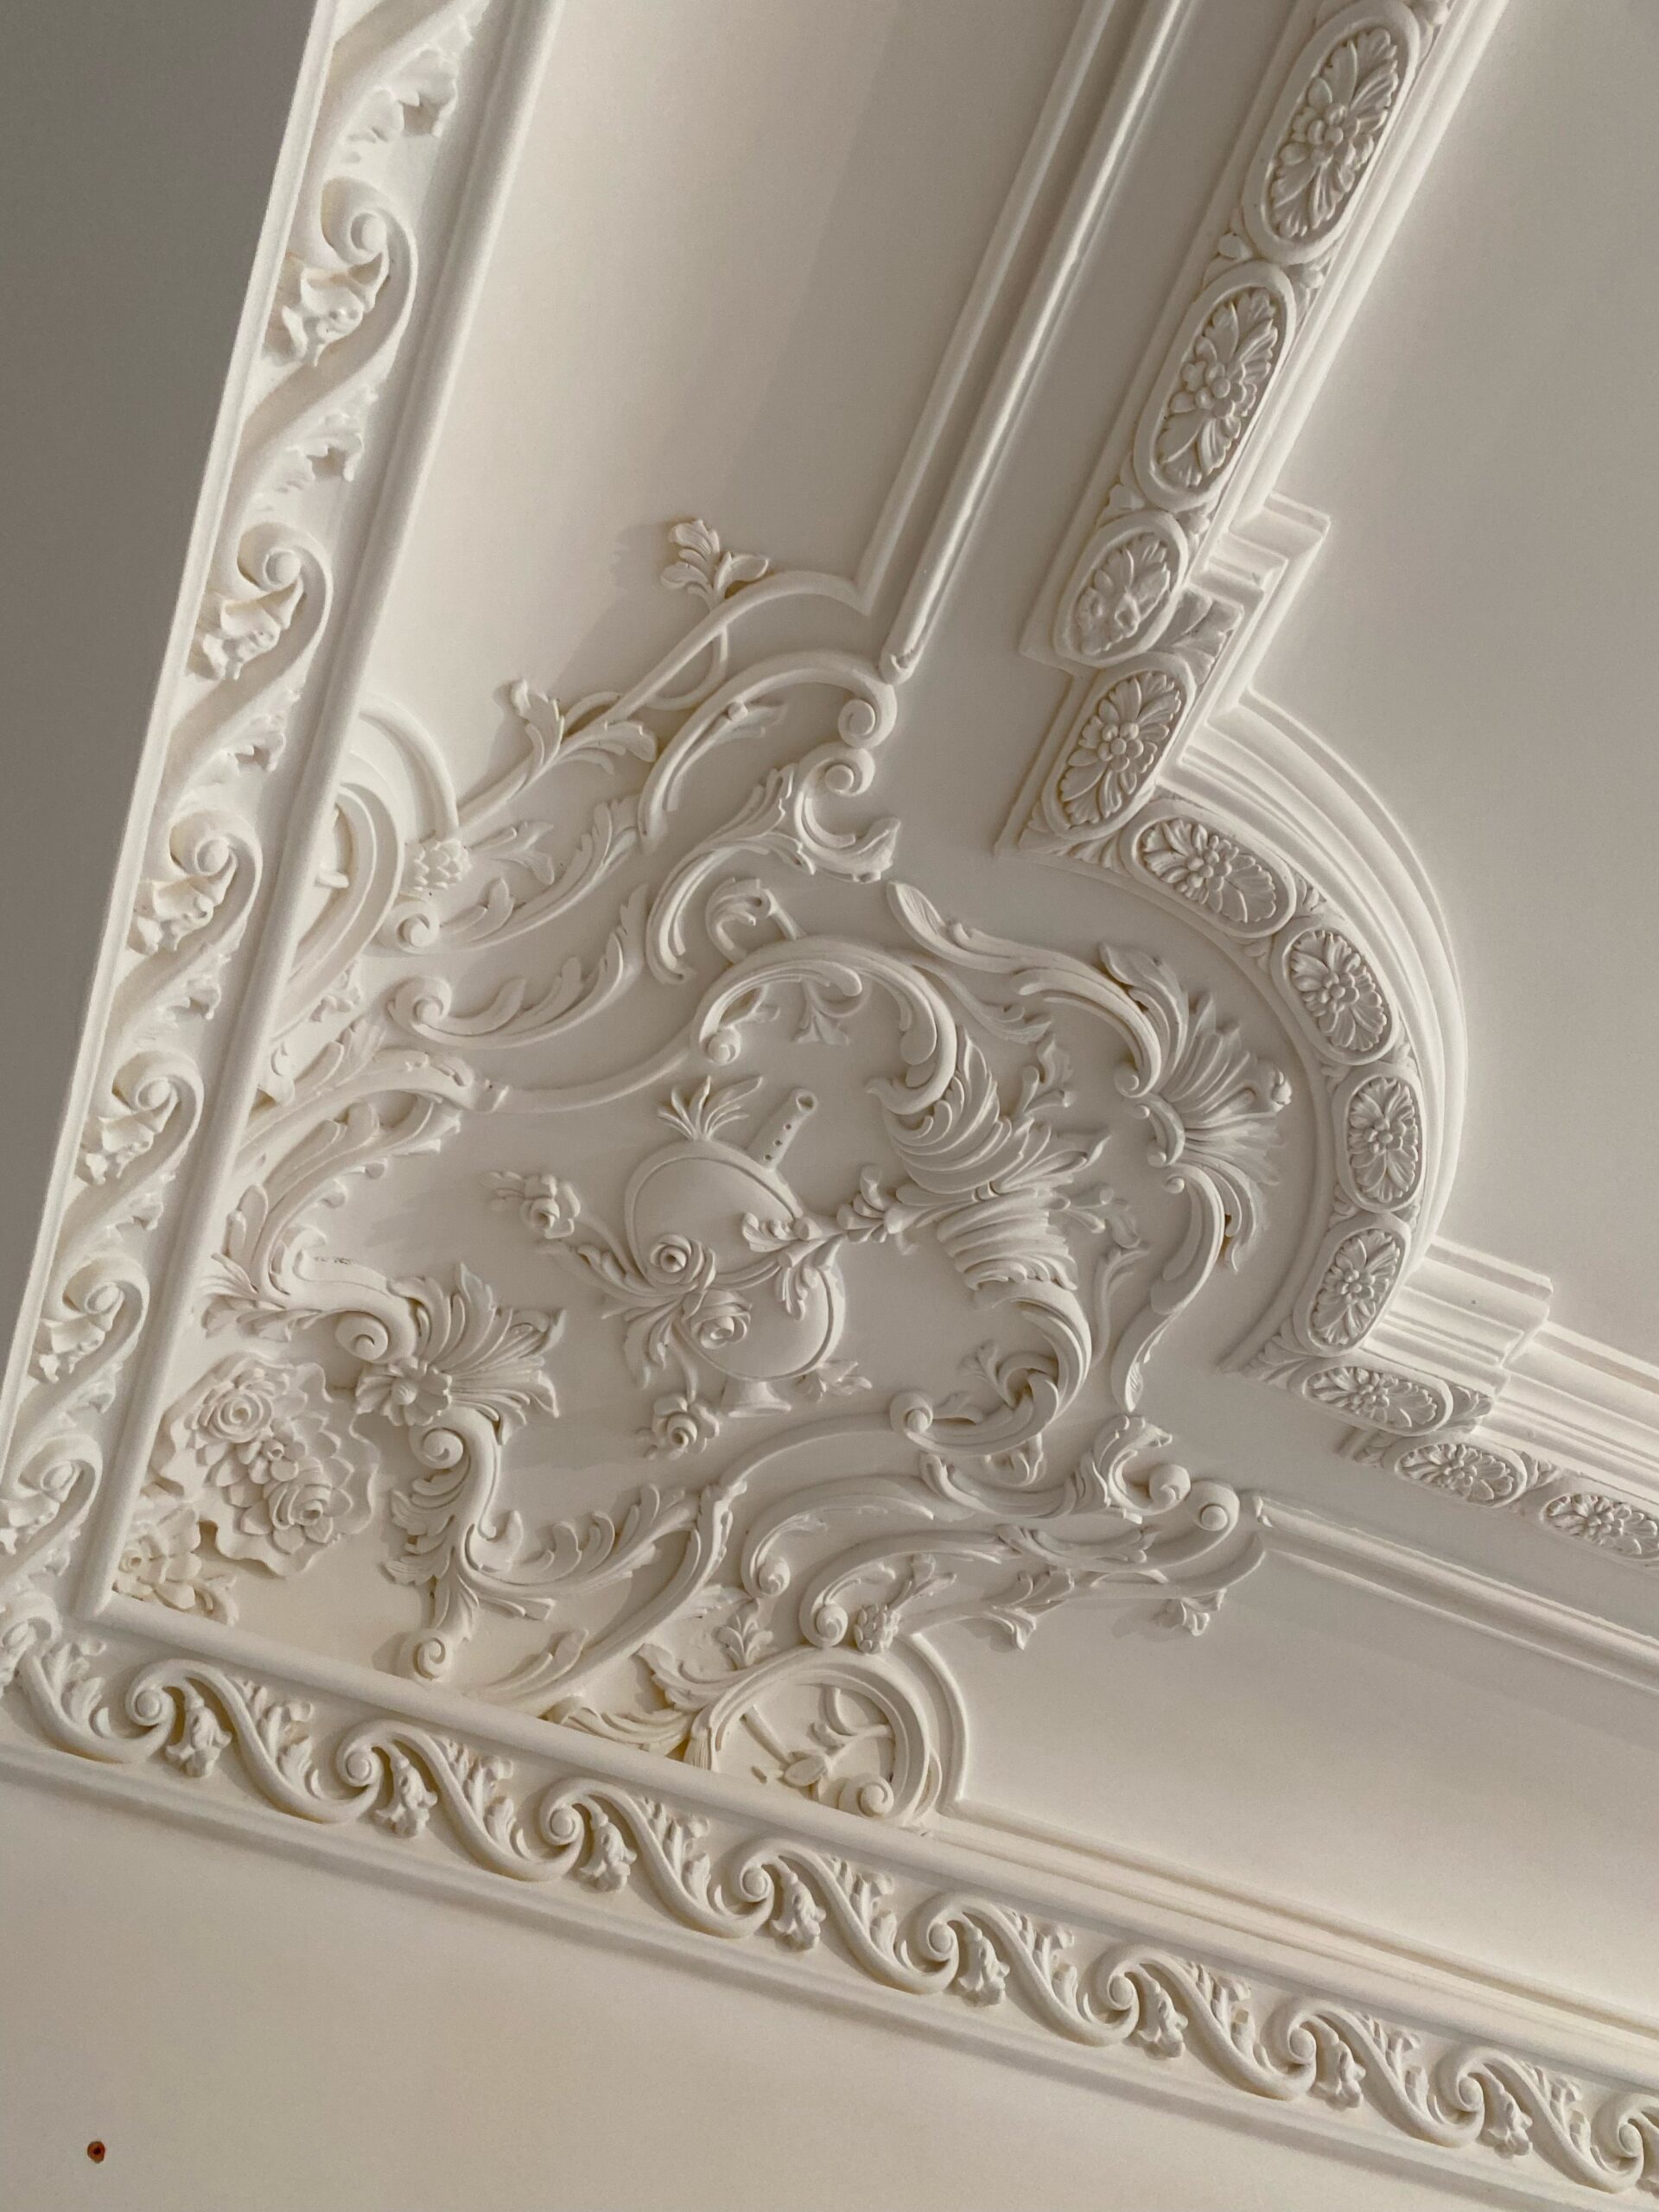 Corner of a ceiling with crown molding and extra designs.